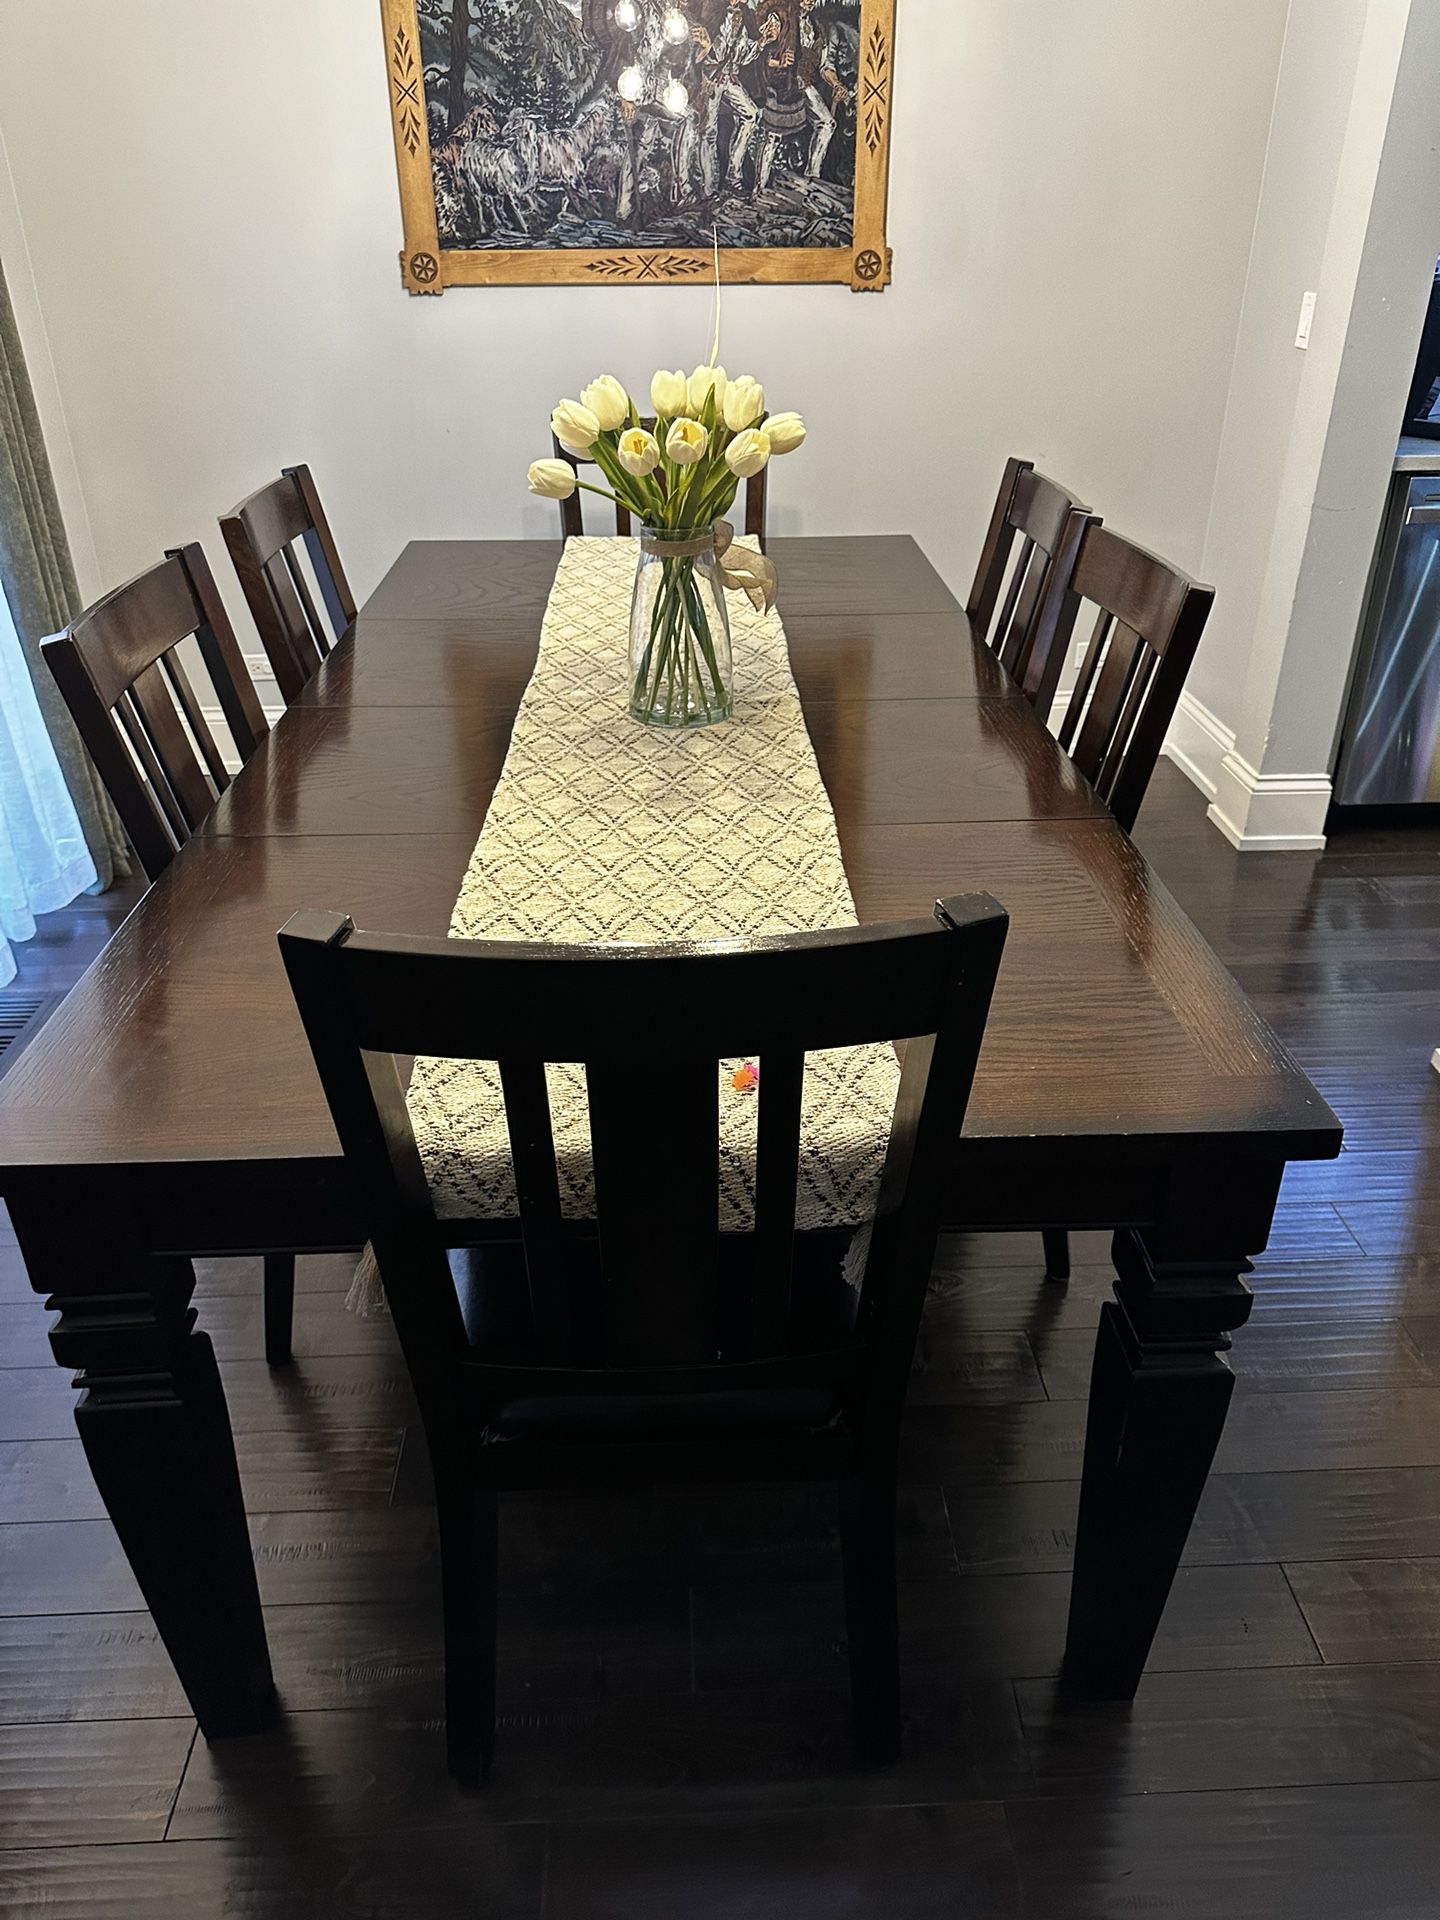 Dinning Table And Chairs 